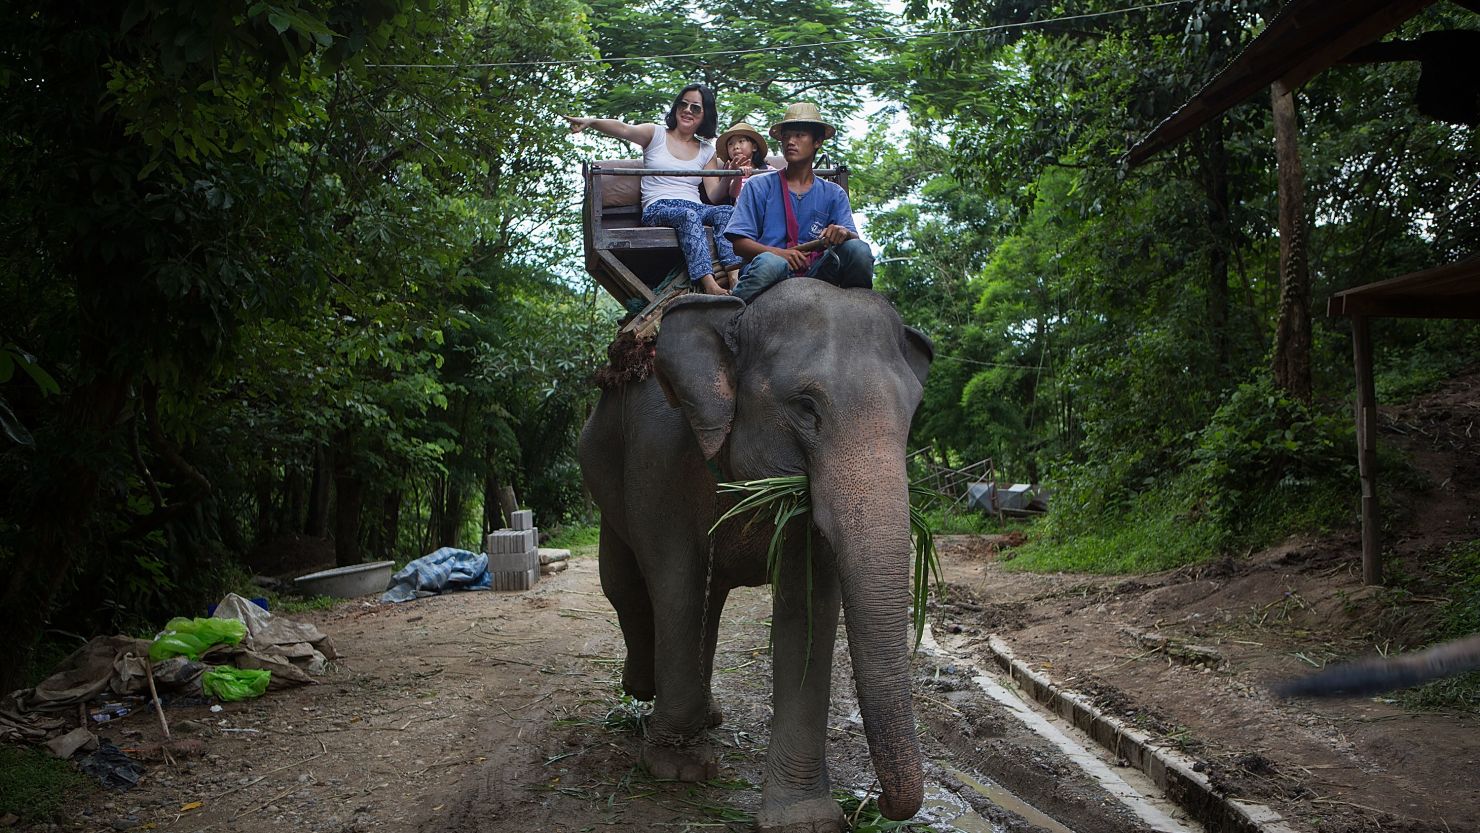 Despite being denounced by multiple animal welfare groups, elephant riding remains a popular activity for tourists visiting Thailand. (File photo)